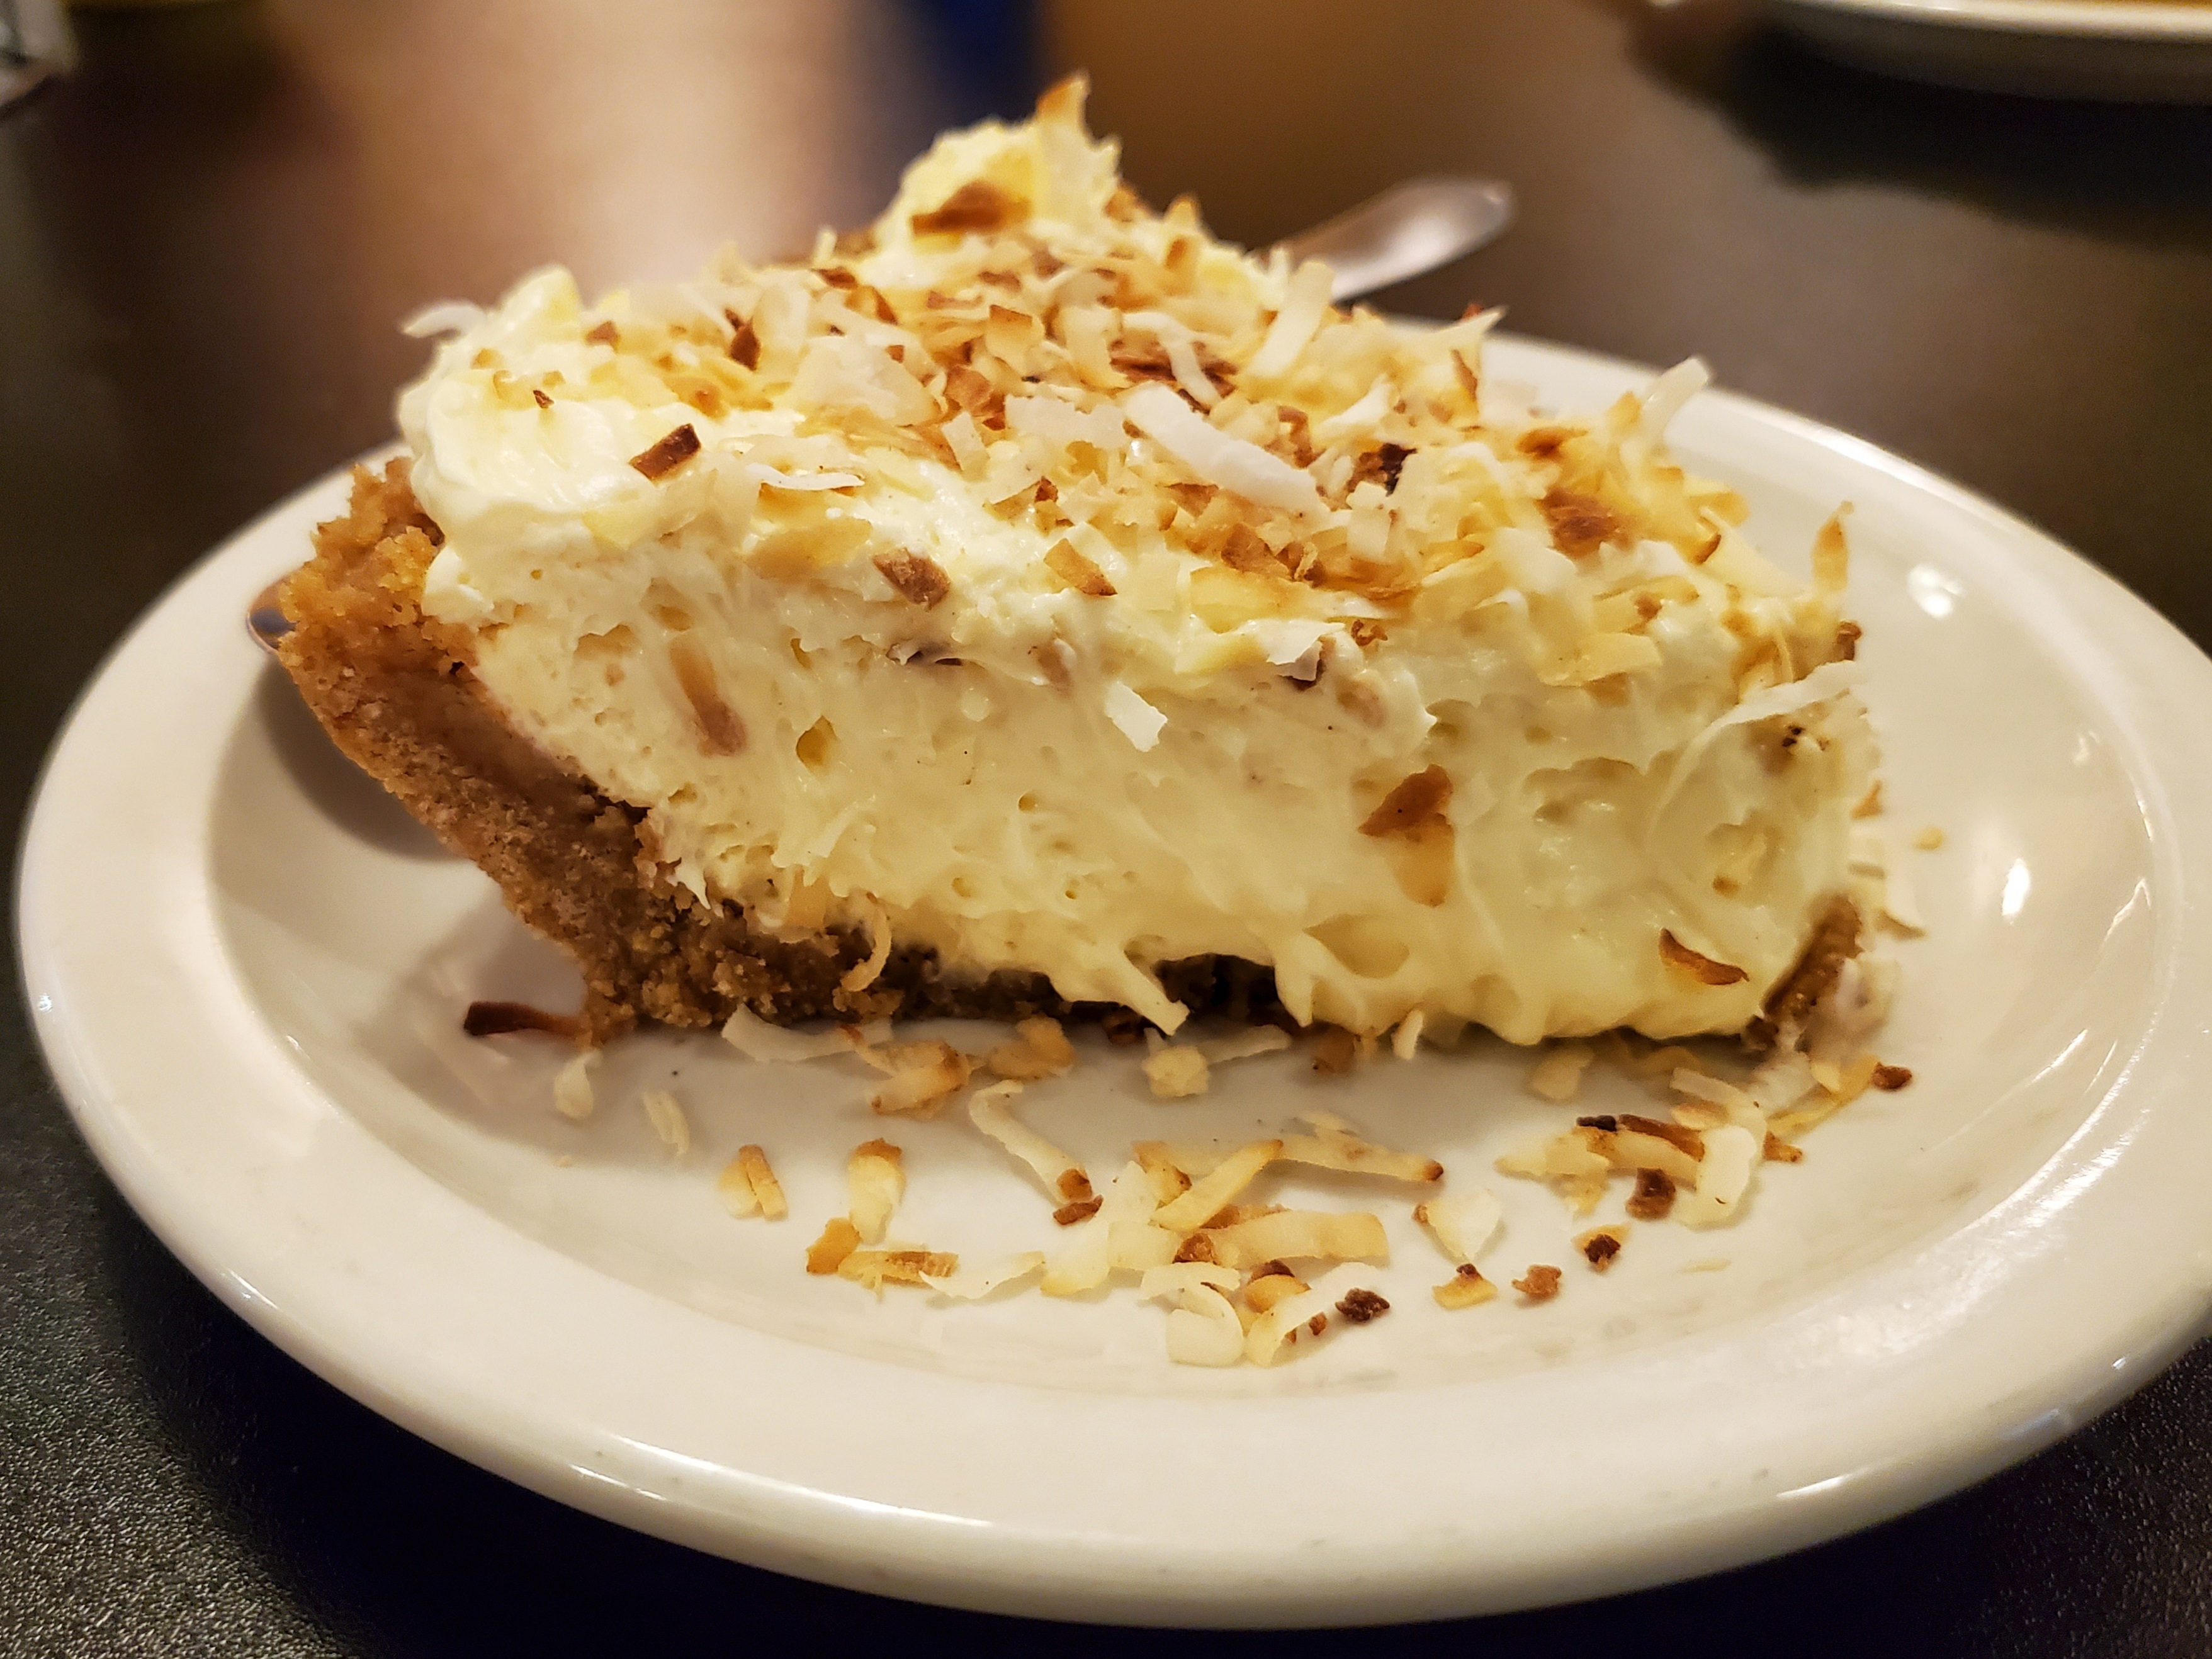 On a white plate, there is a slice of coconut cream pie with toasted coconut shavings. Photo by Carl Busch.